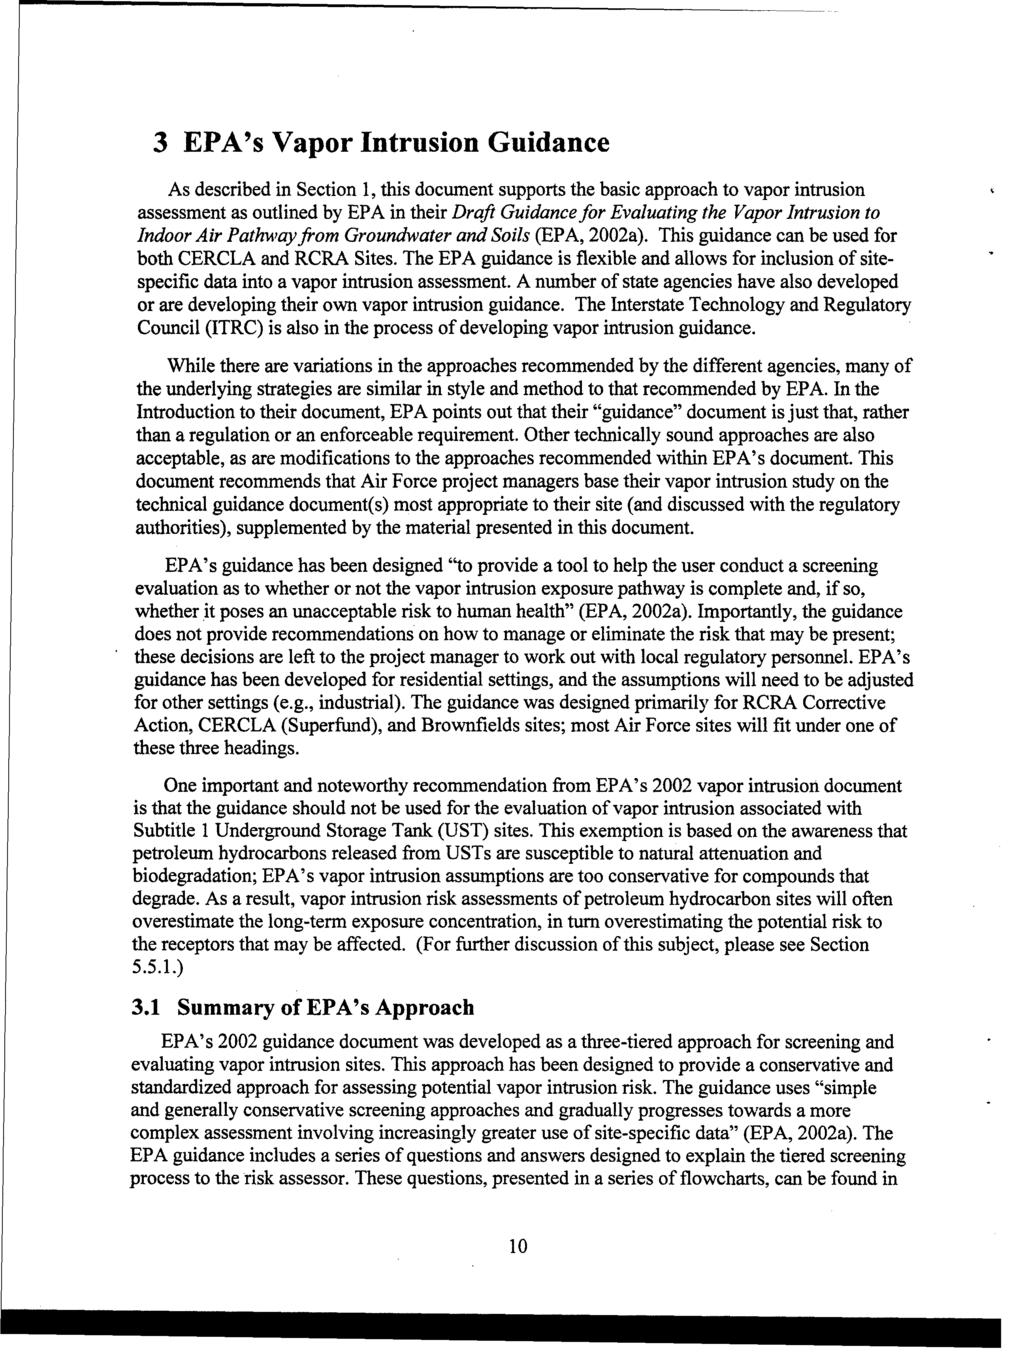 3 EPA's Vapor Intrusion Guidance As described in Section 1, this document supports the basic approach to vapor intrusion assessment as outlined by EPA in their Draft Guidance for Evaluating the Vapor